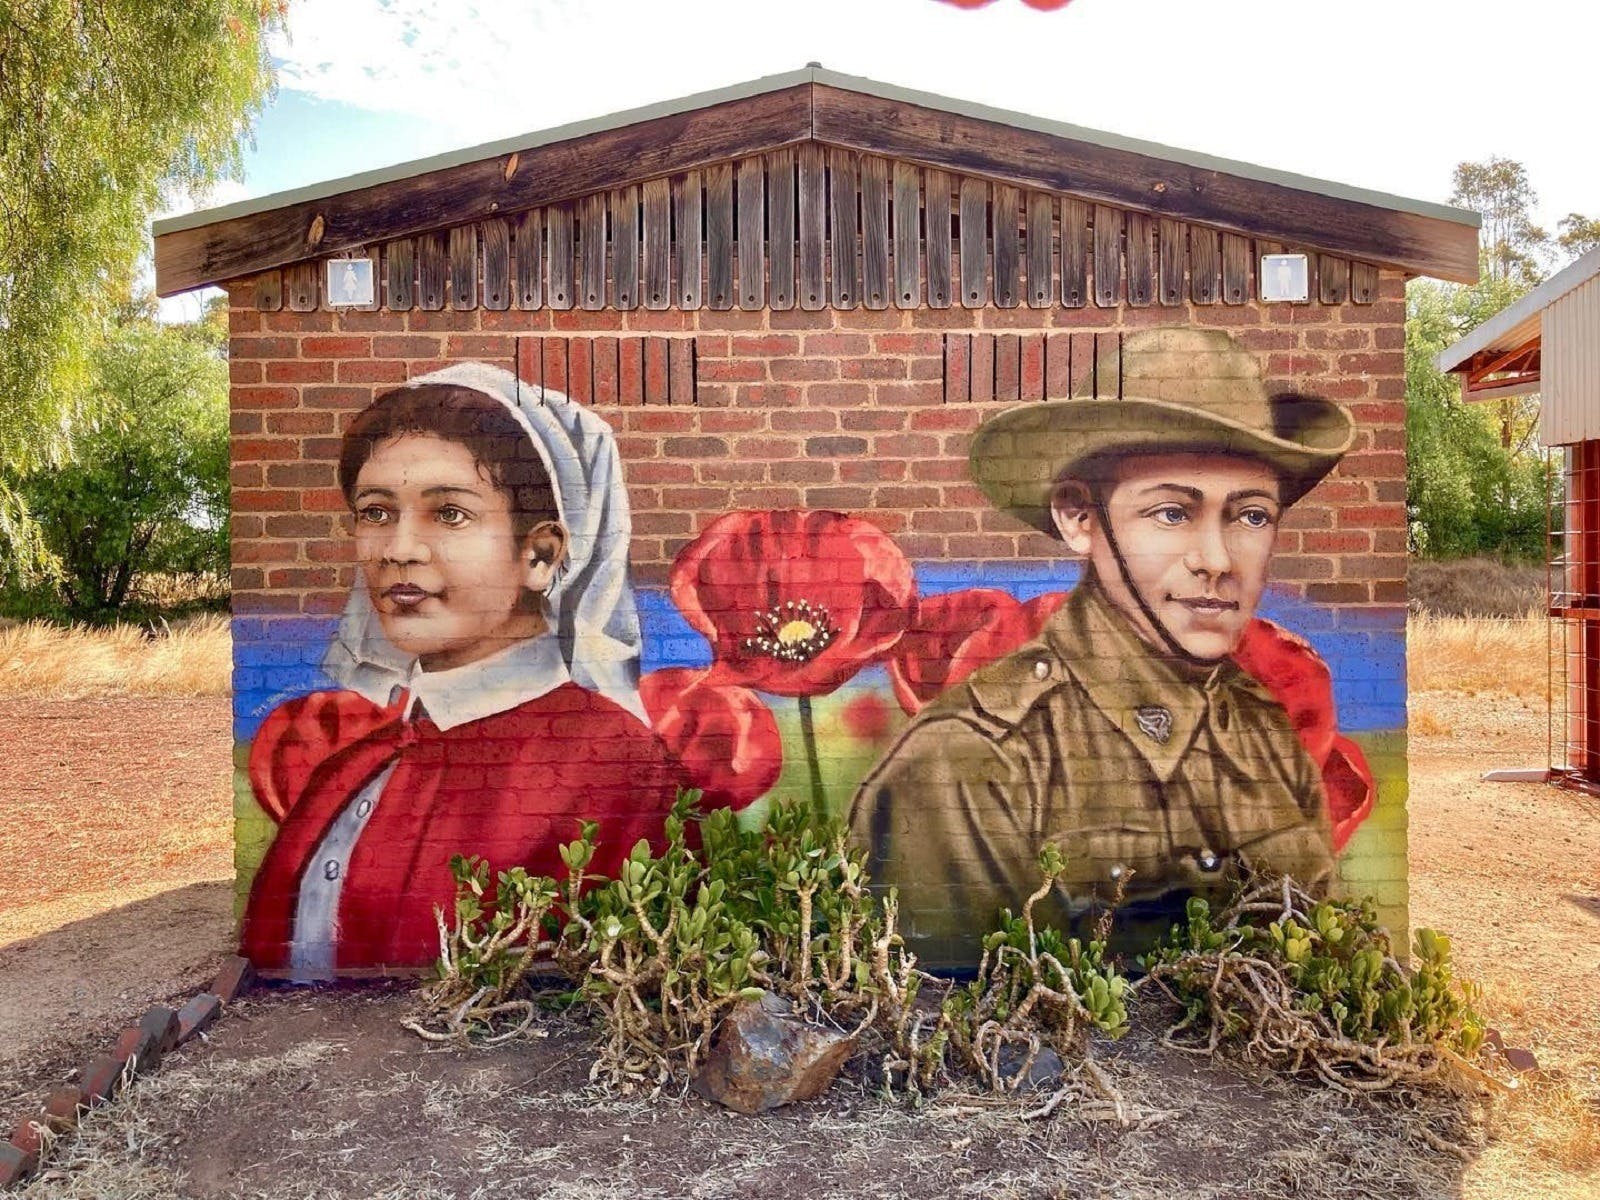 Military mural painted by Tim Bowtell